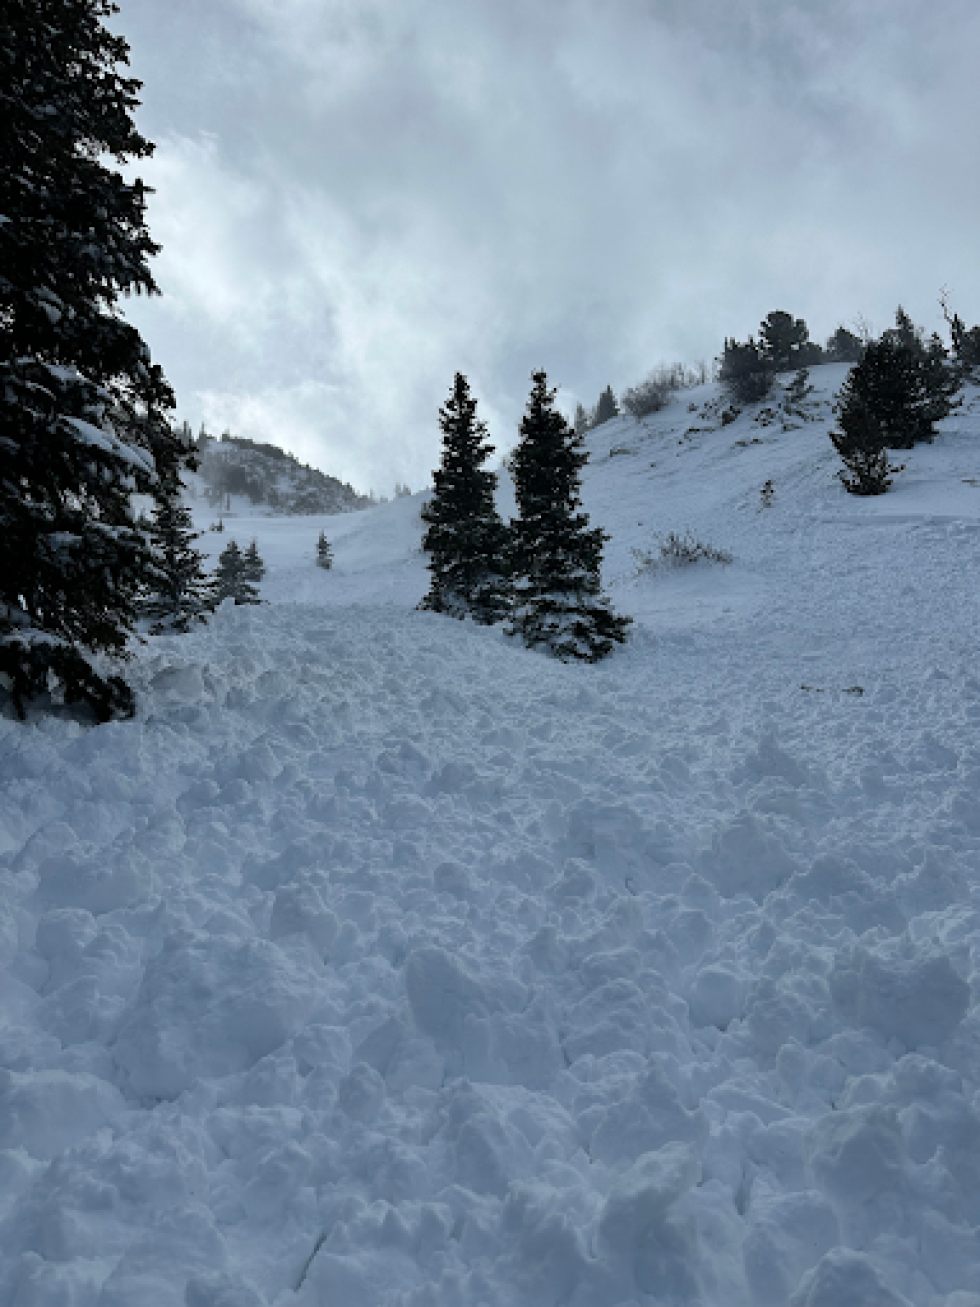 Photo of a skier-triggered avalanche on January 13 near Lost Lake behind Eldora. This avalanche partially buried a skier to the waist.  